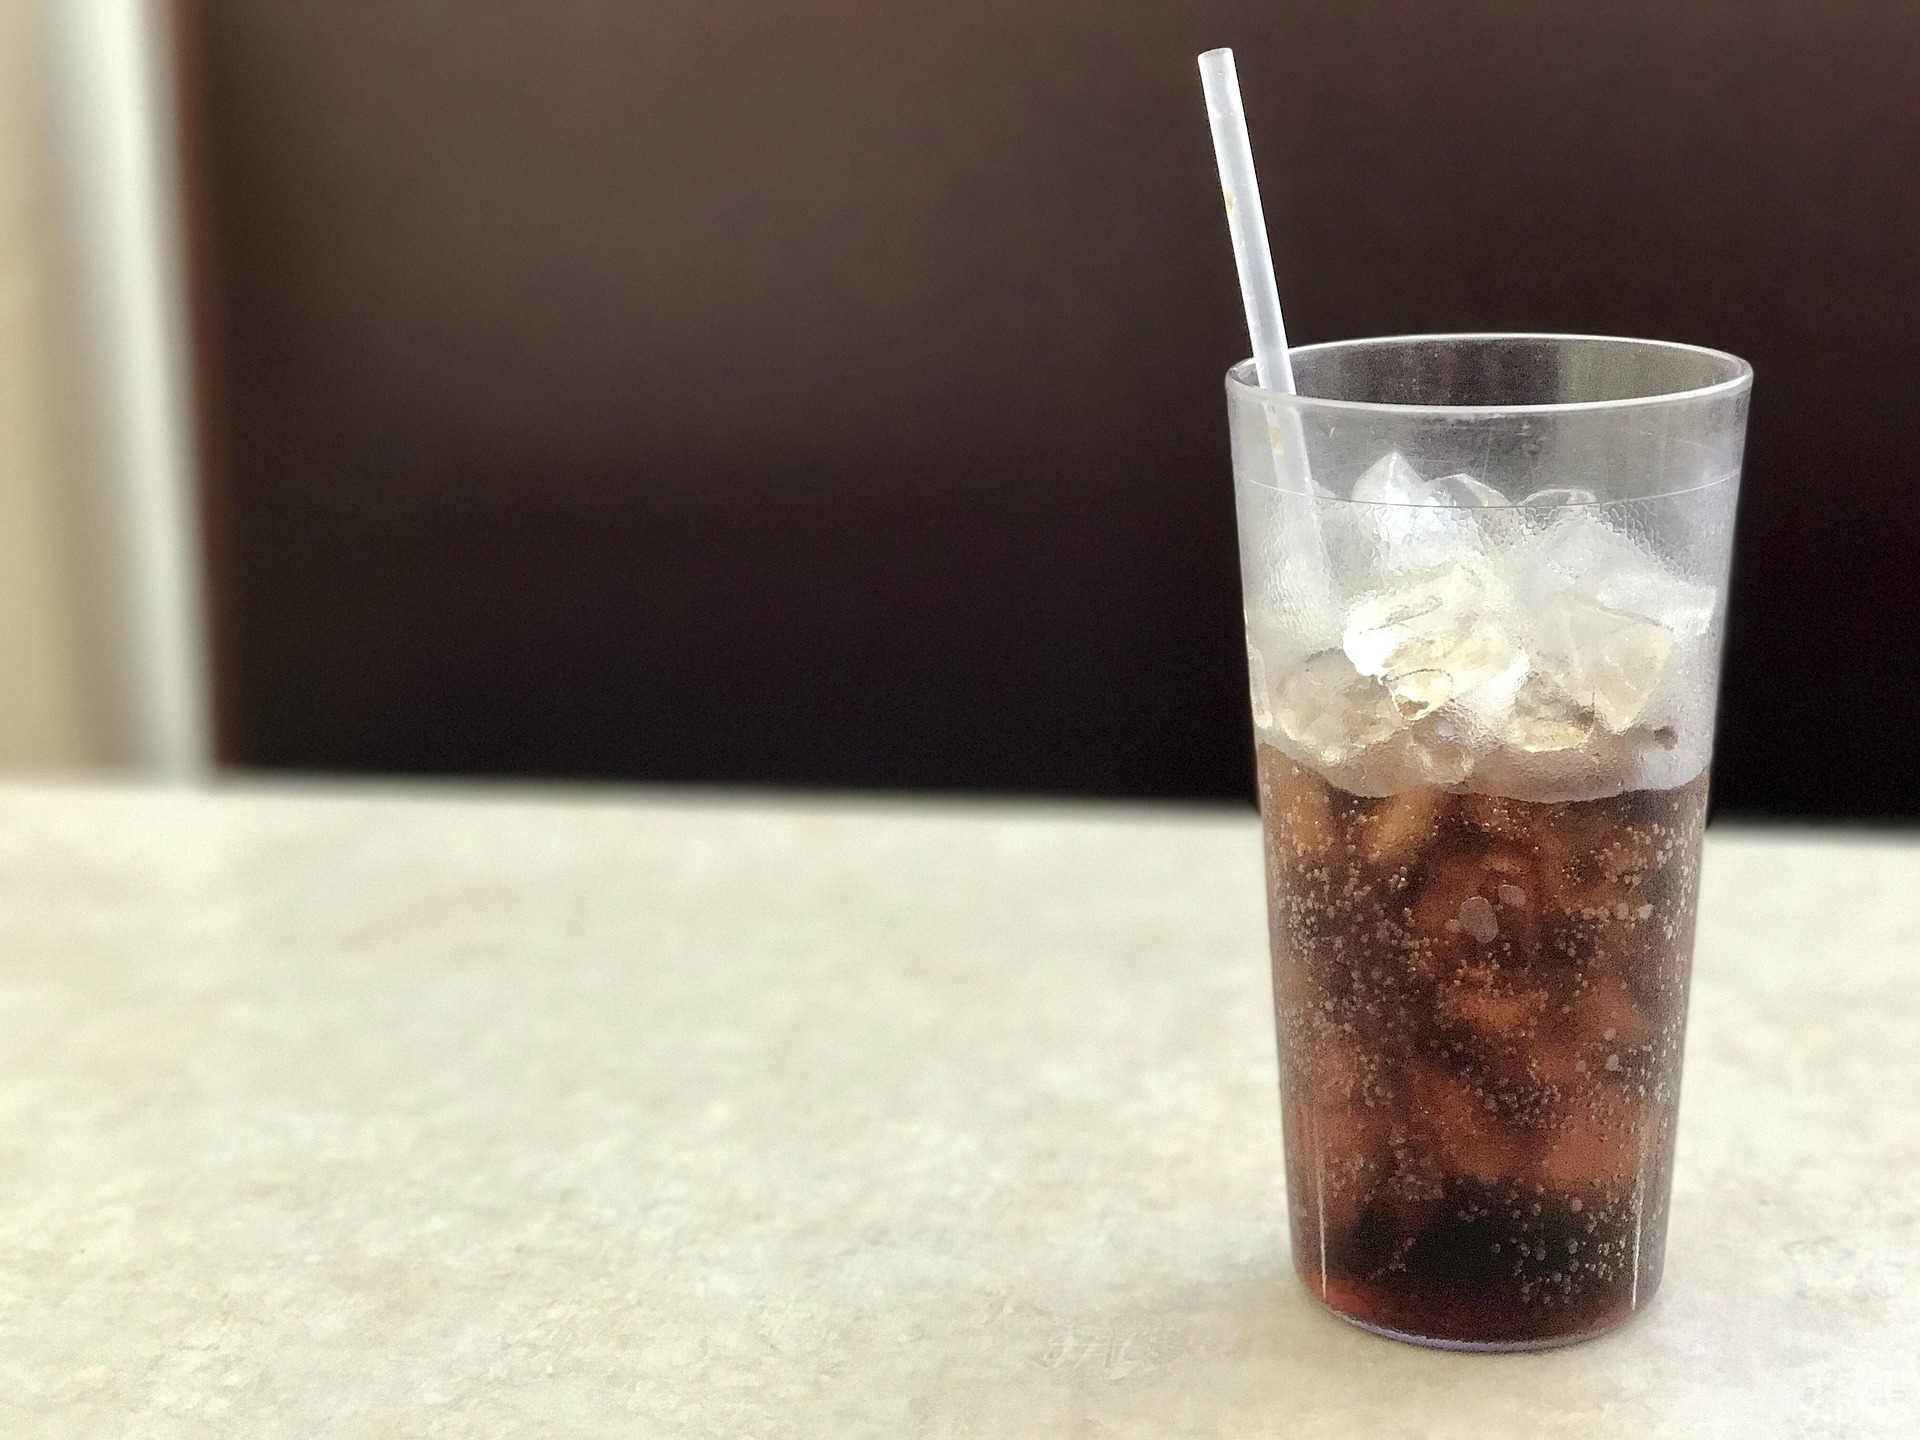 File photo of a cup of soda. Photo: cote26